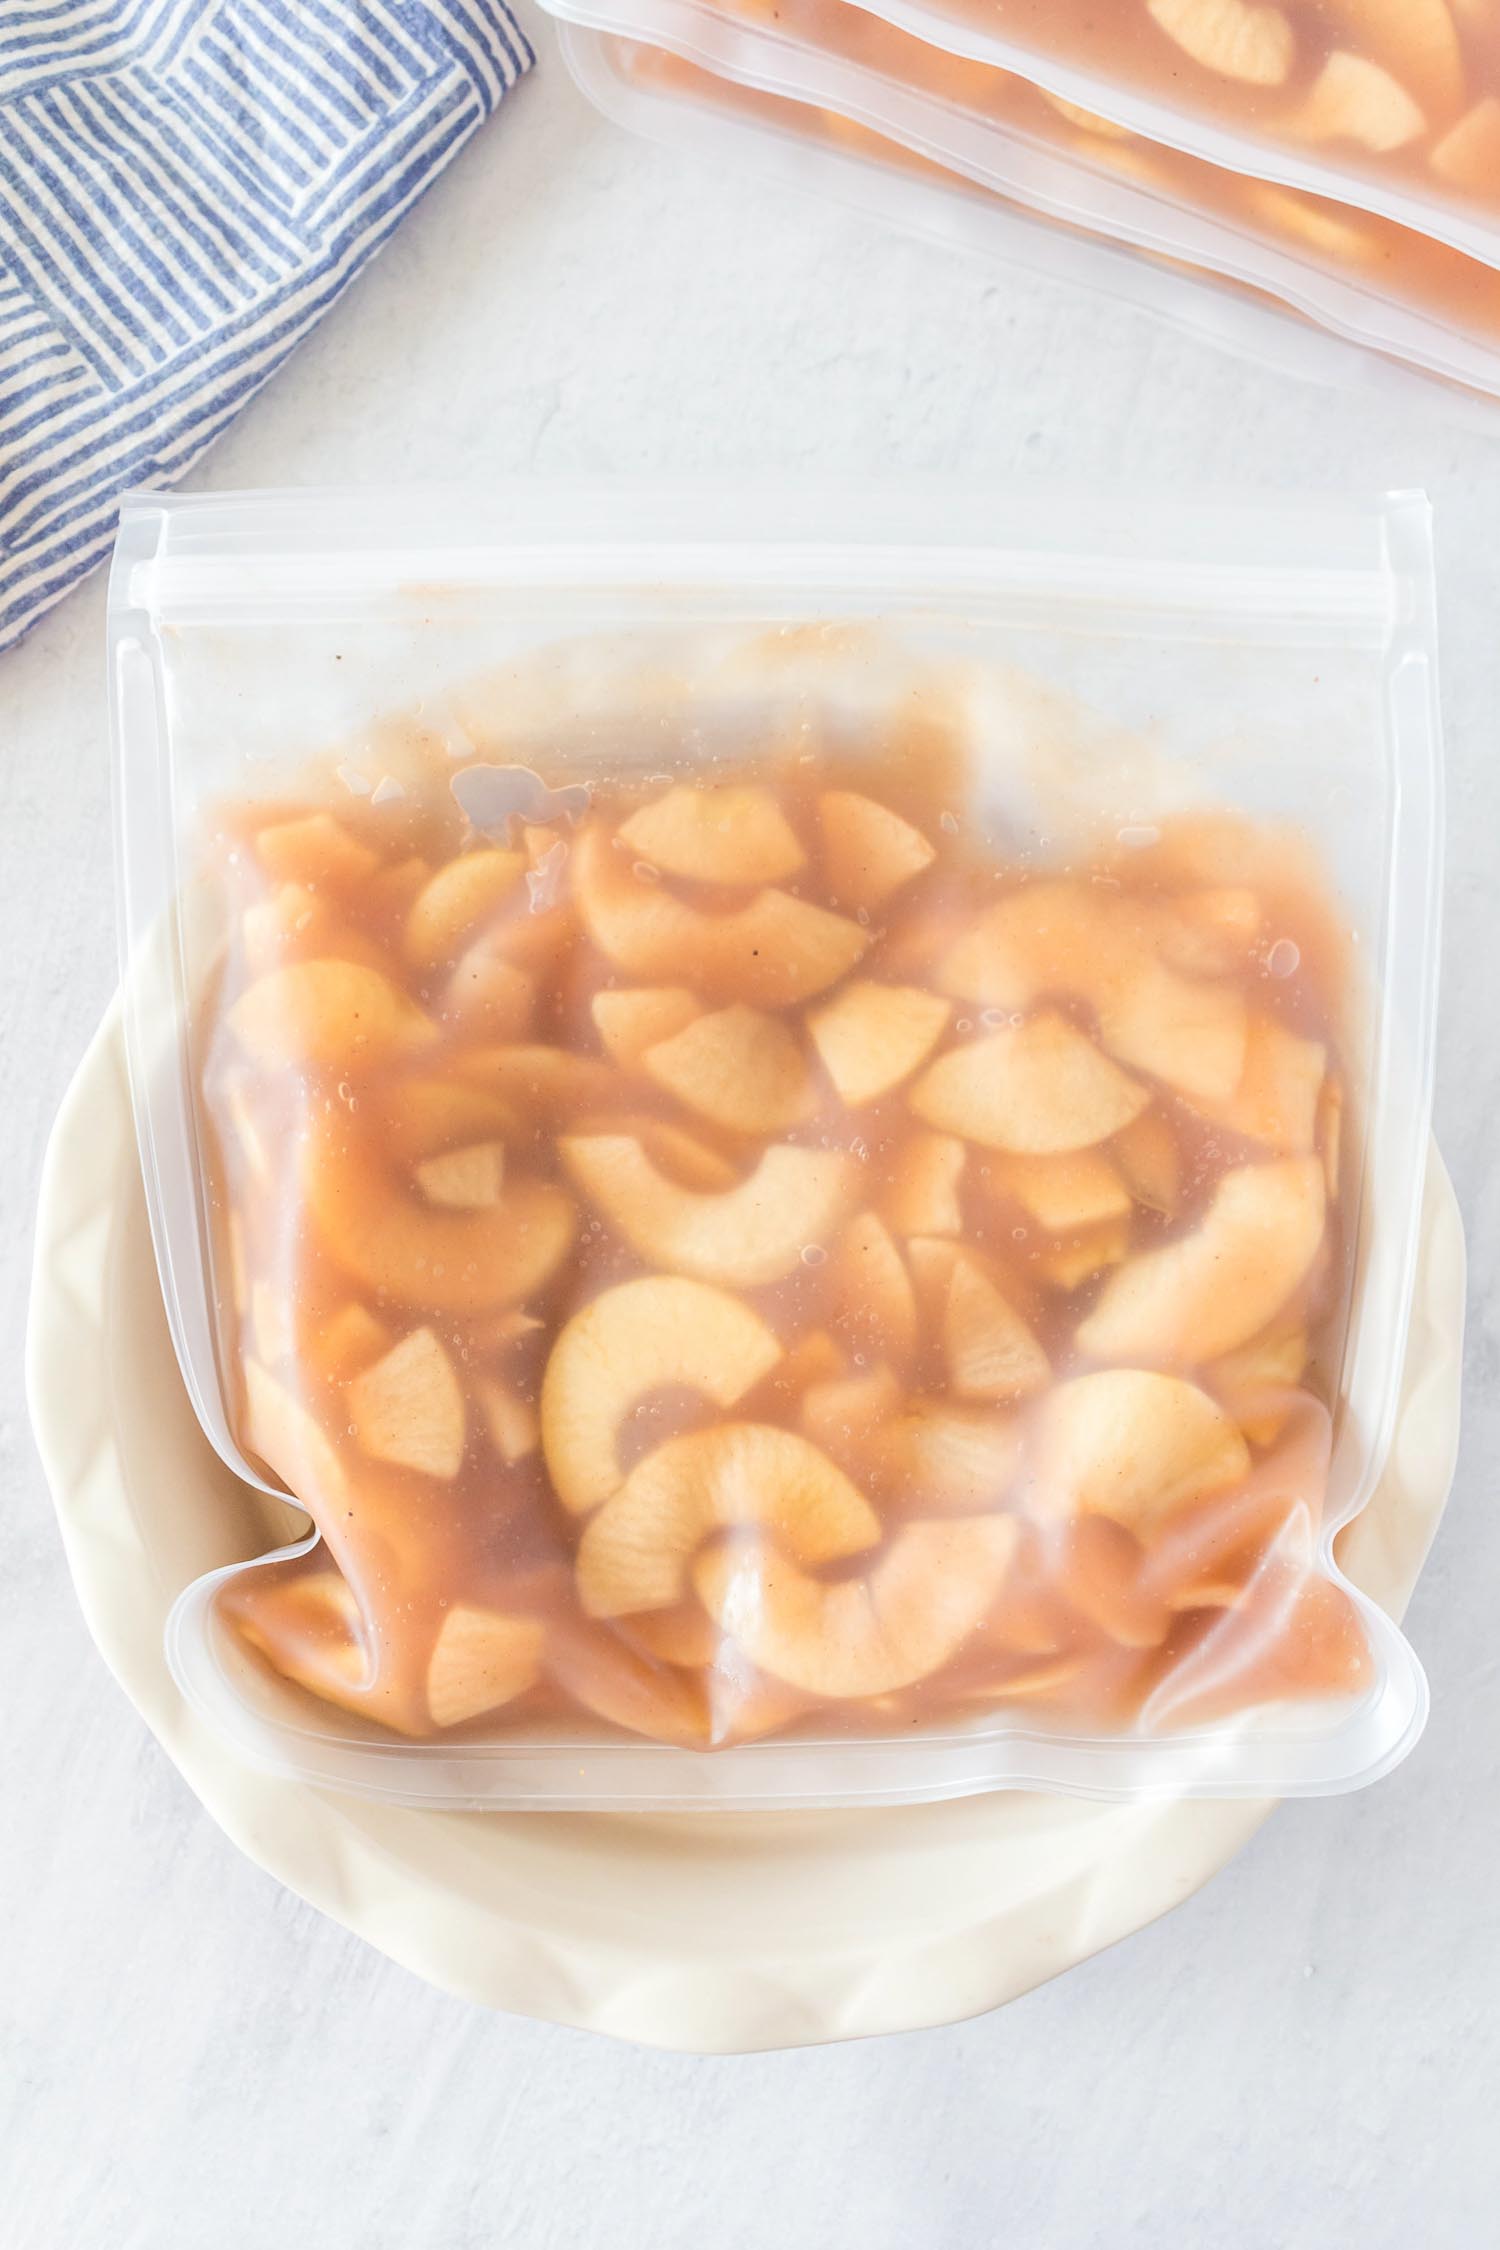 A resealable freezer bag full of apple pie filling in a white pie pan.